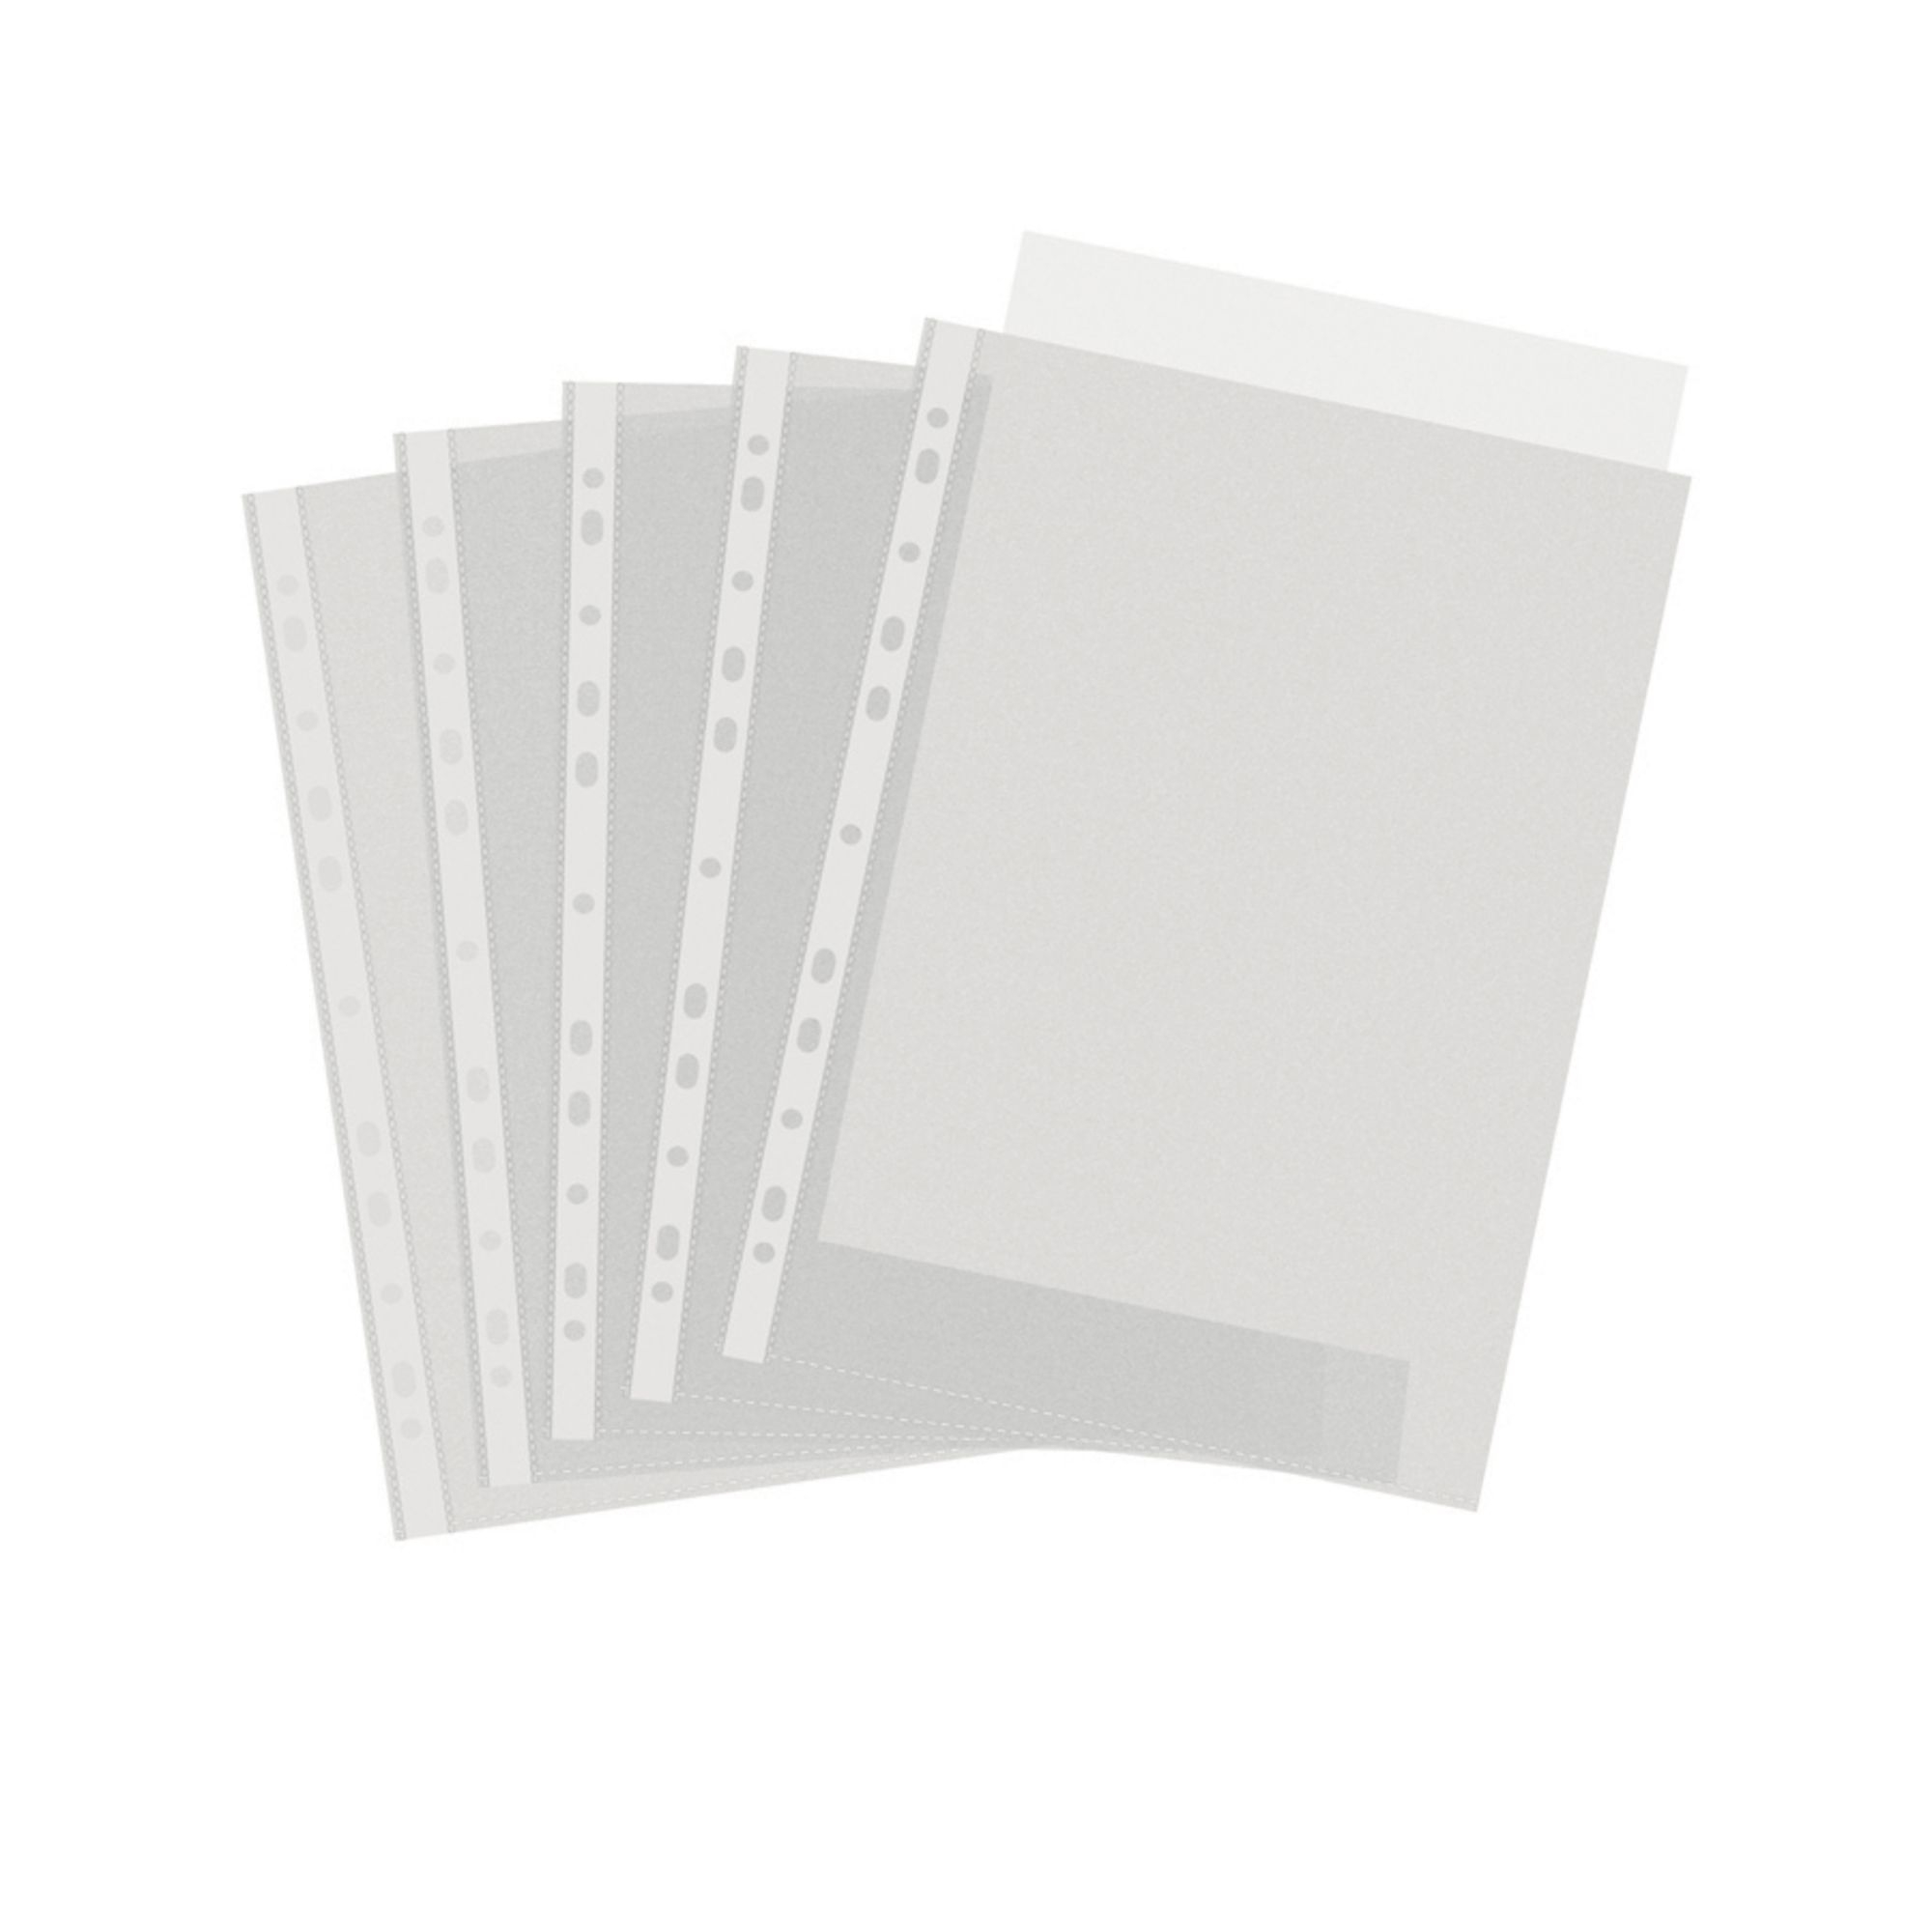 Heavy Duty Punched Pocket A4 Clear - Pack of 100